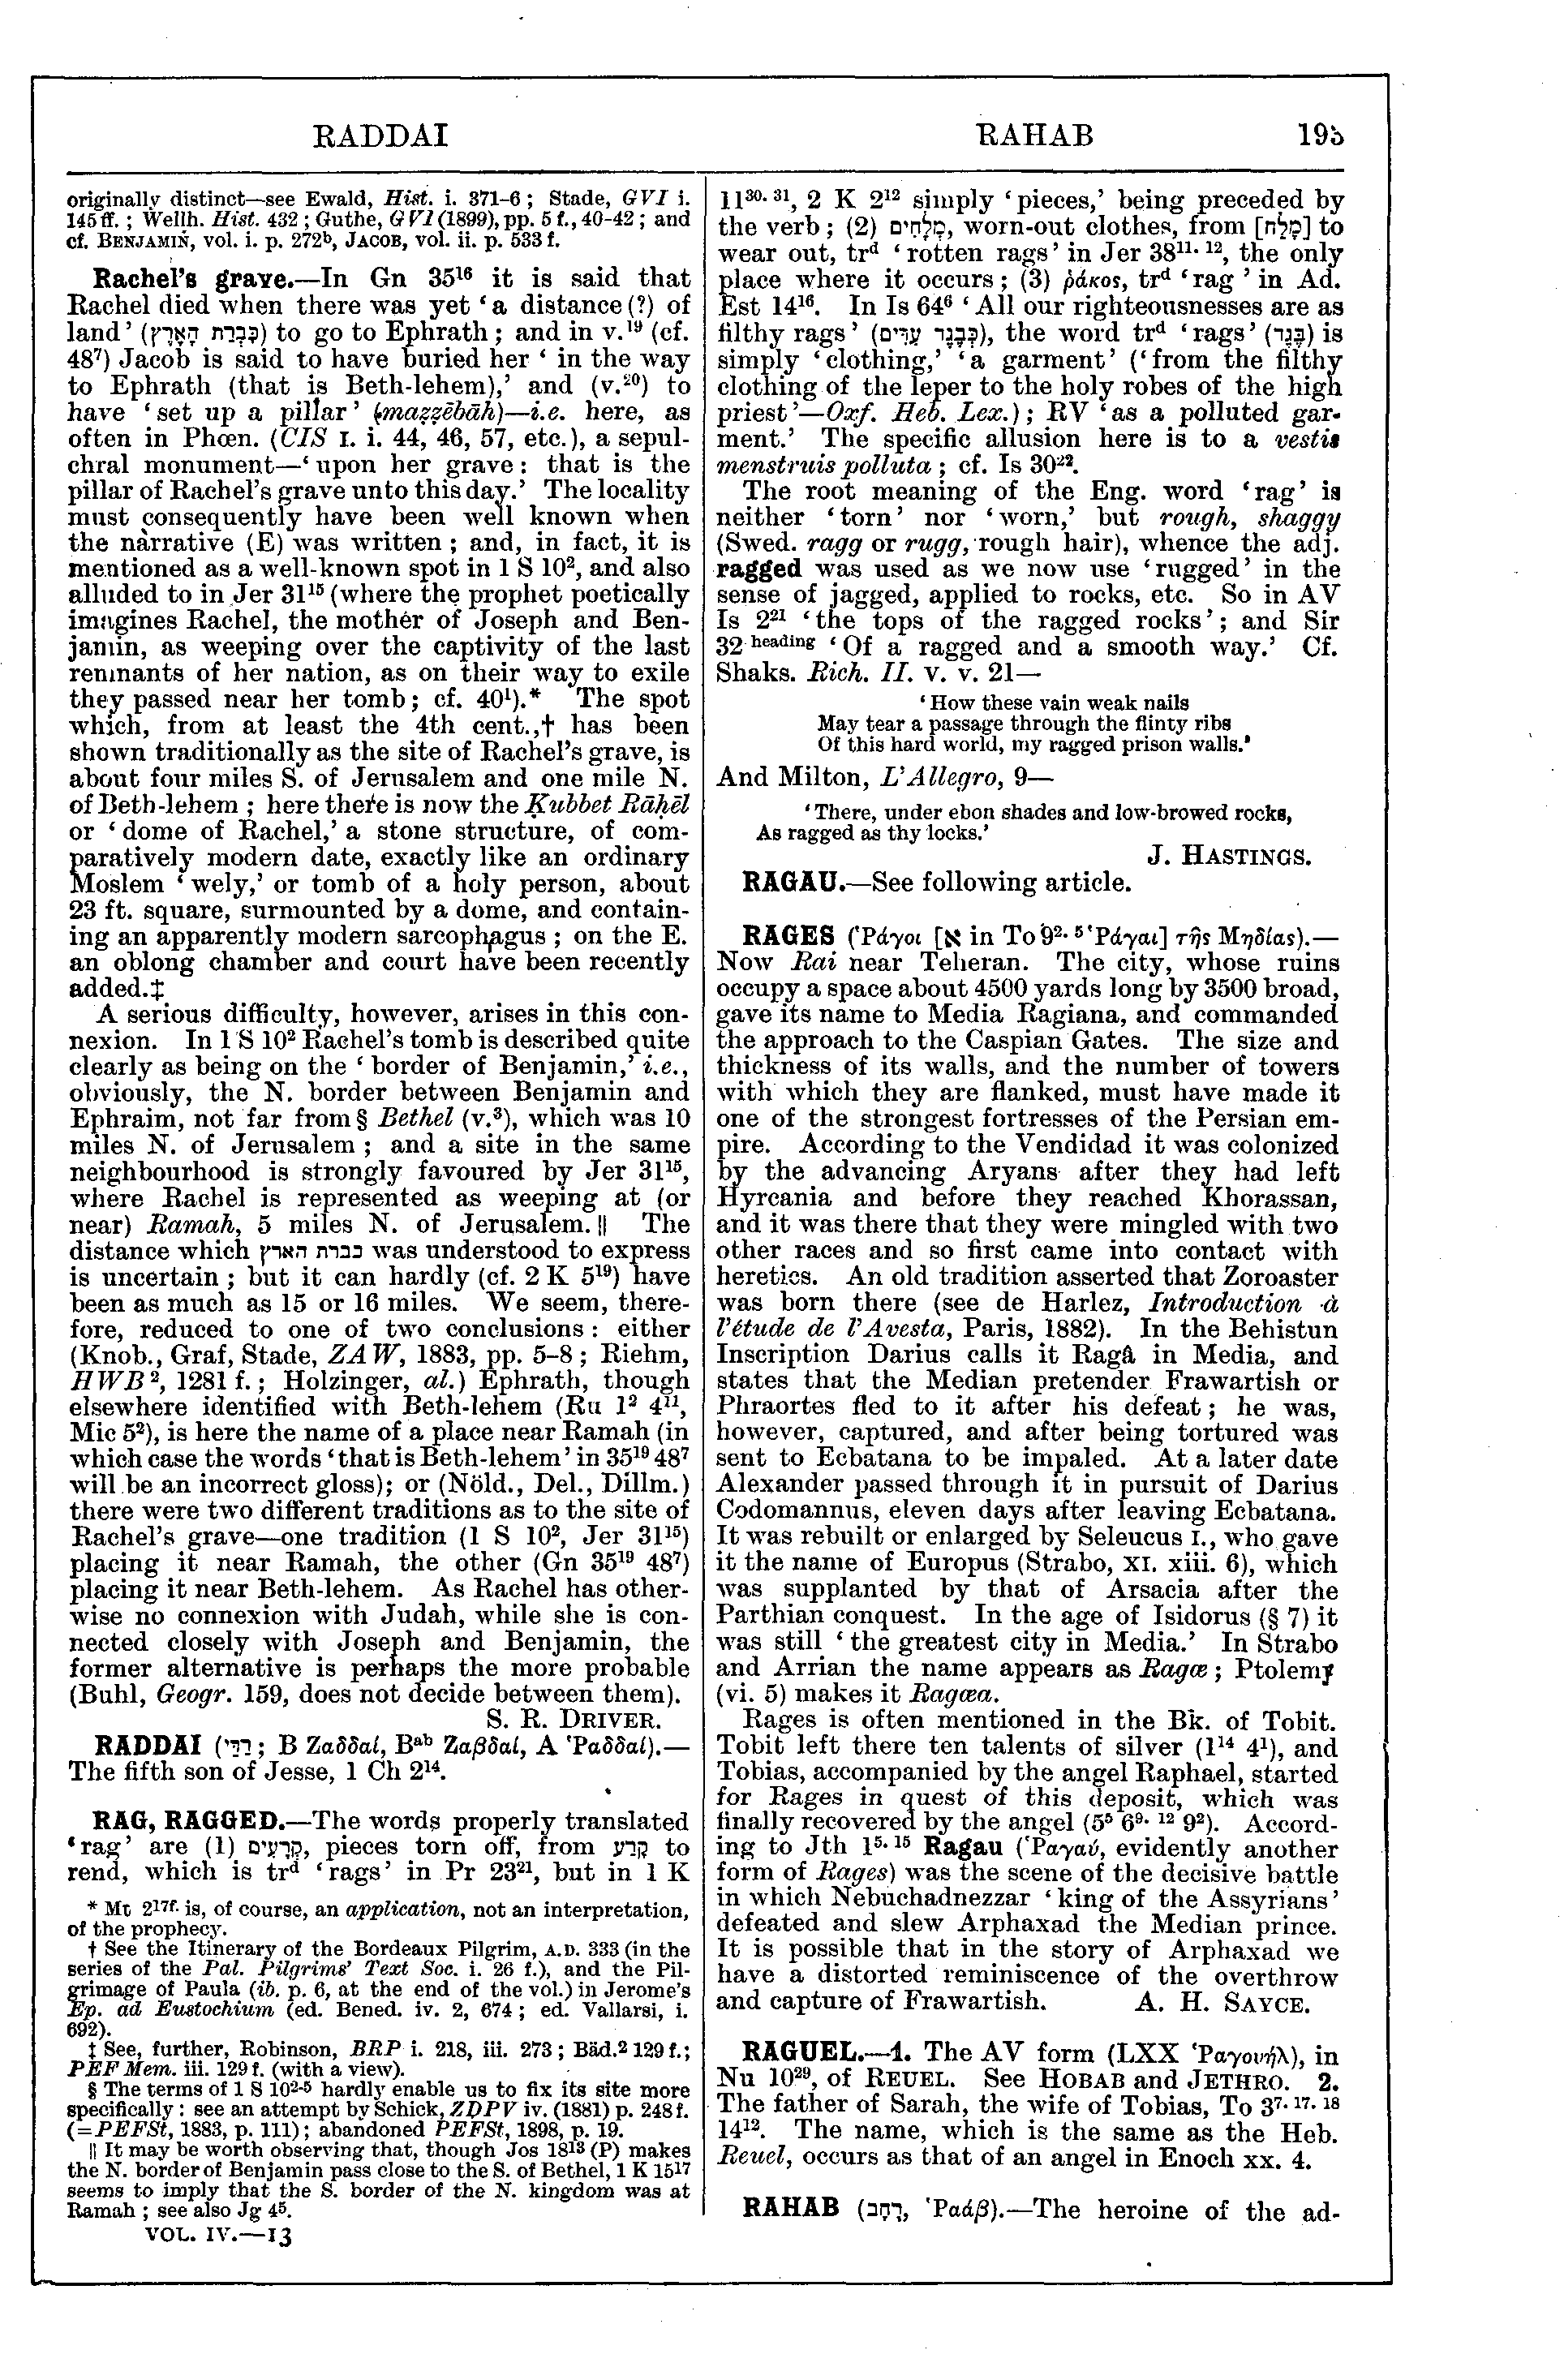 Image of page 193